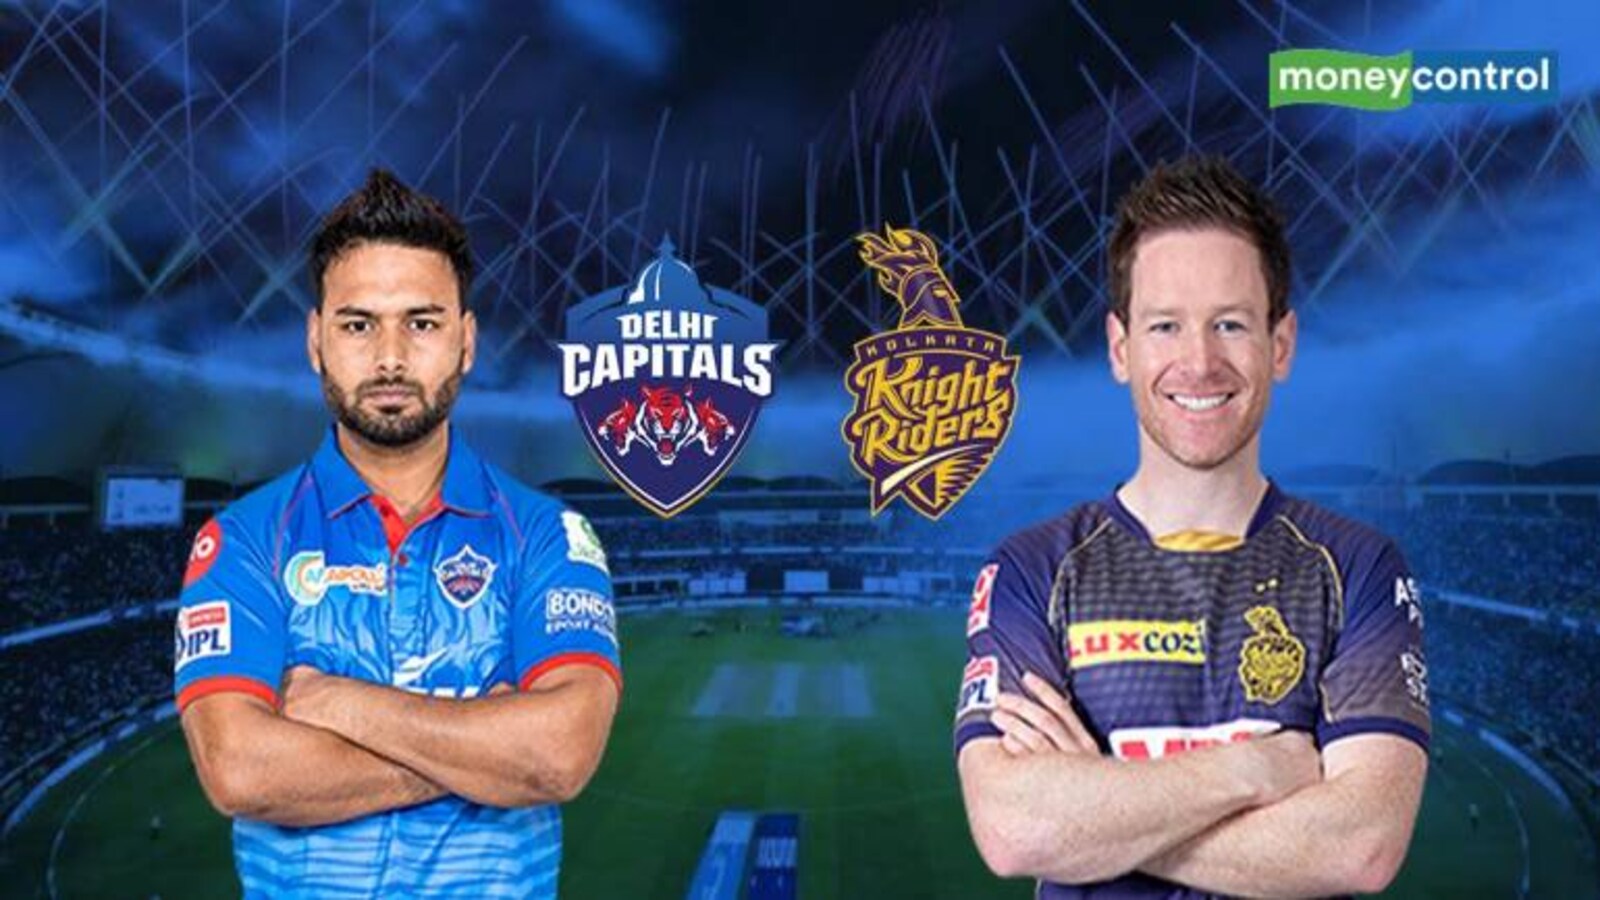 DC new jersey 2022 vs KKR: Delhi Capitals players jersey number - The  SportsRush